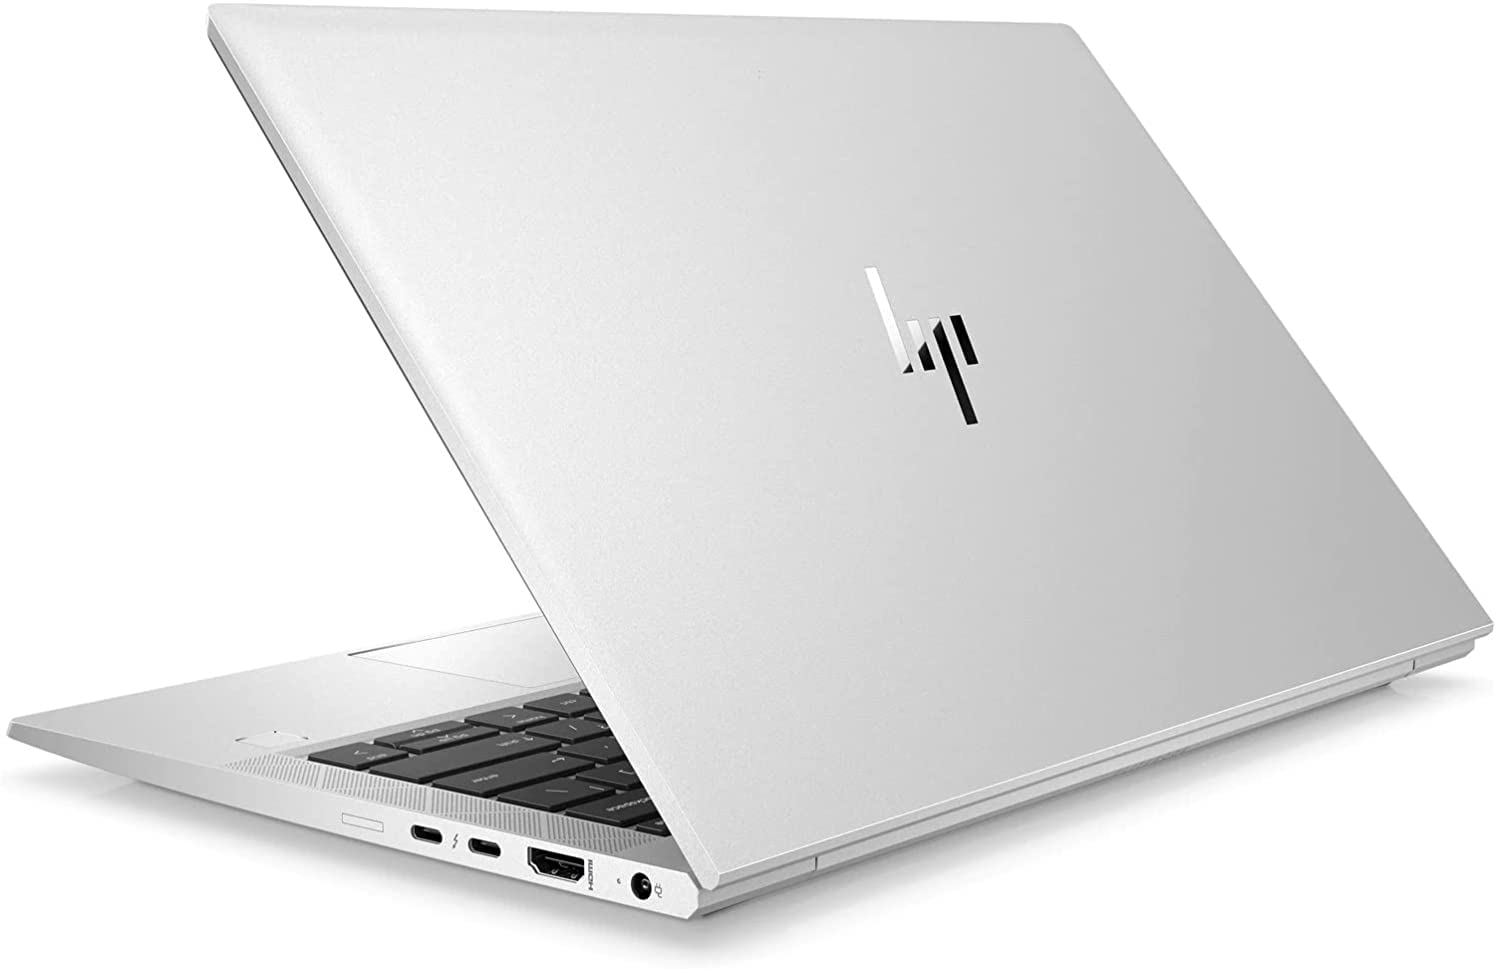 HP EliteBook 830 G8 13.3" FHD Laptop with HP Sure View Privacy Screen - i7 1165G7, Xe Graphics, 16GB DDR4, 1TB SSD, WIFI 6 & BT 5.2, LTE, Smart Card Reader, Free upgrade to Windows 11 pro (Renewed)